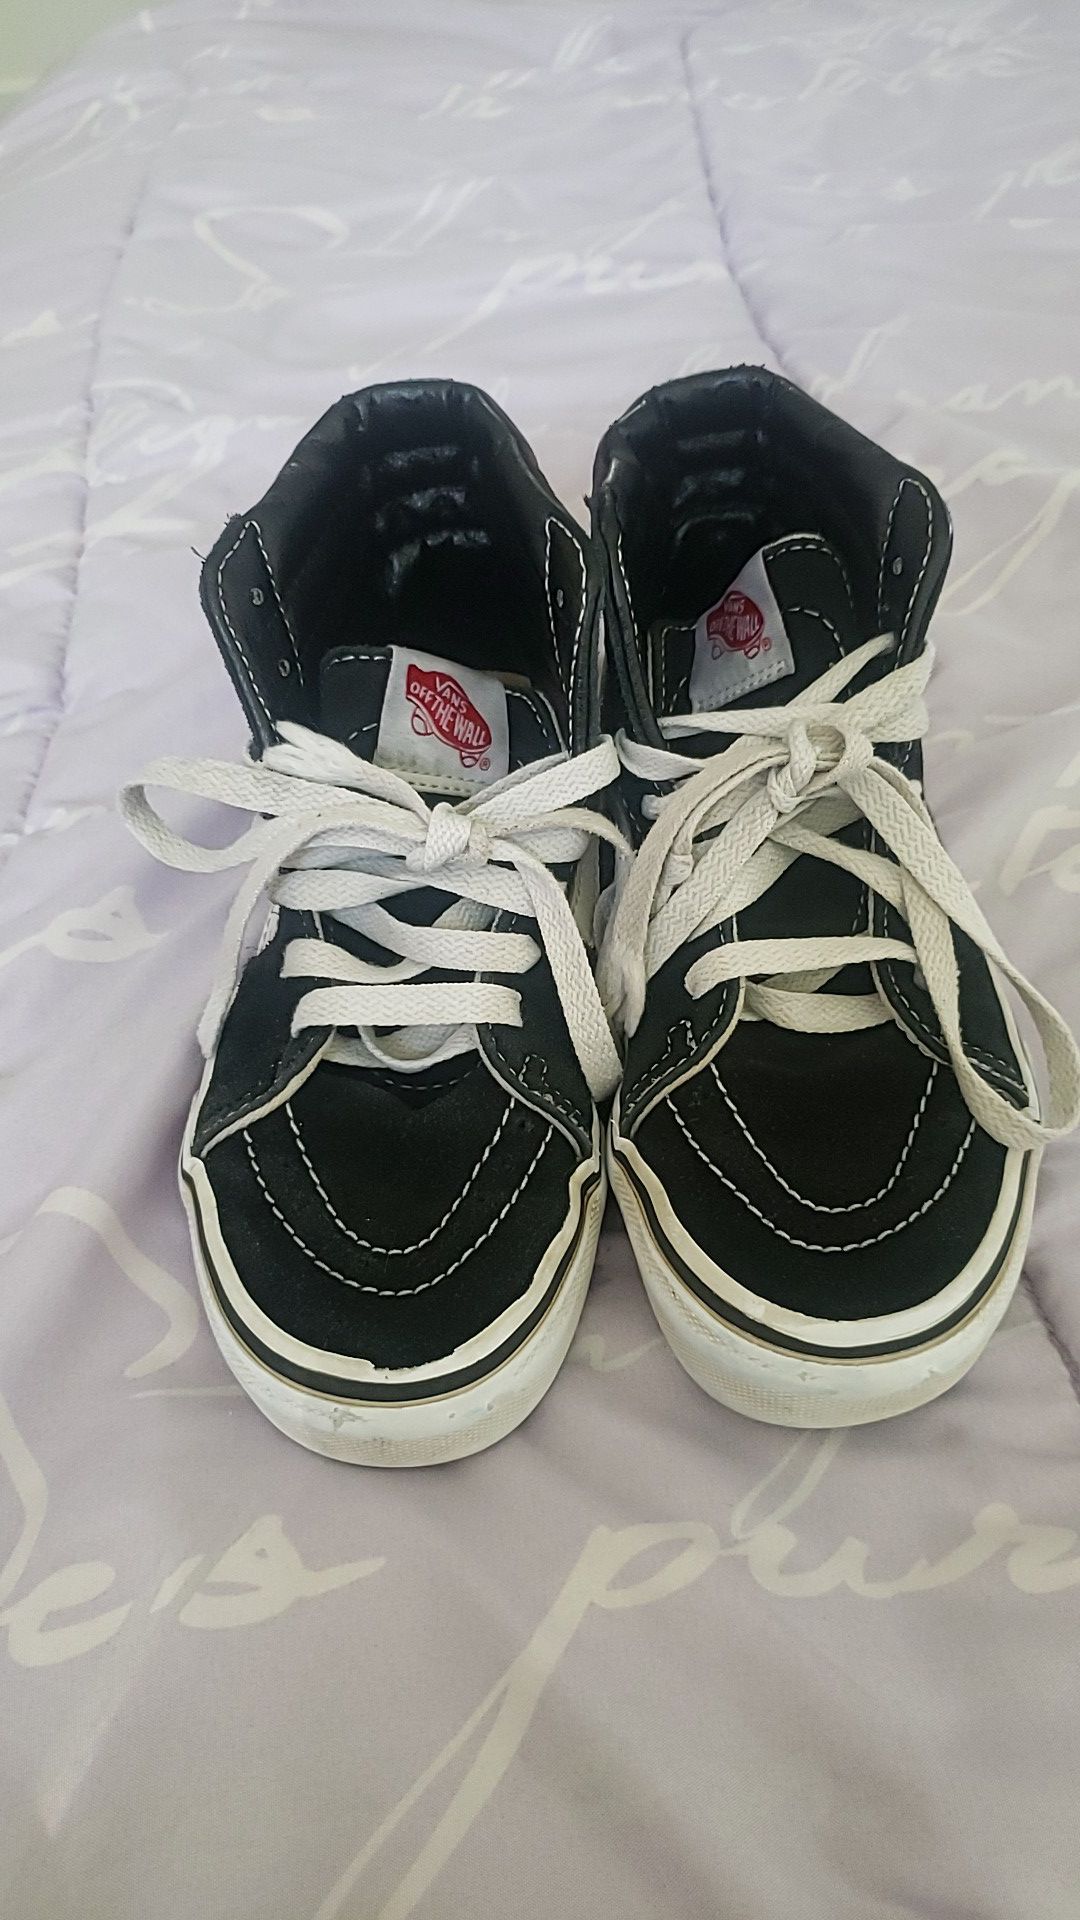 Vans size 2 on youth used